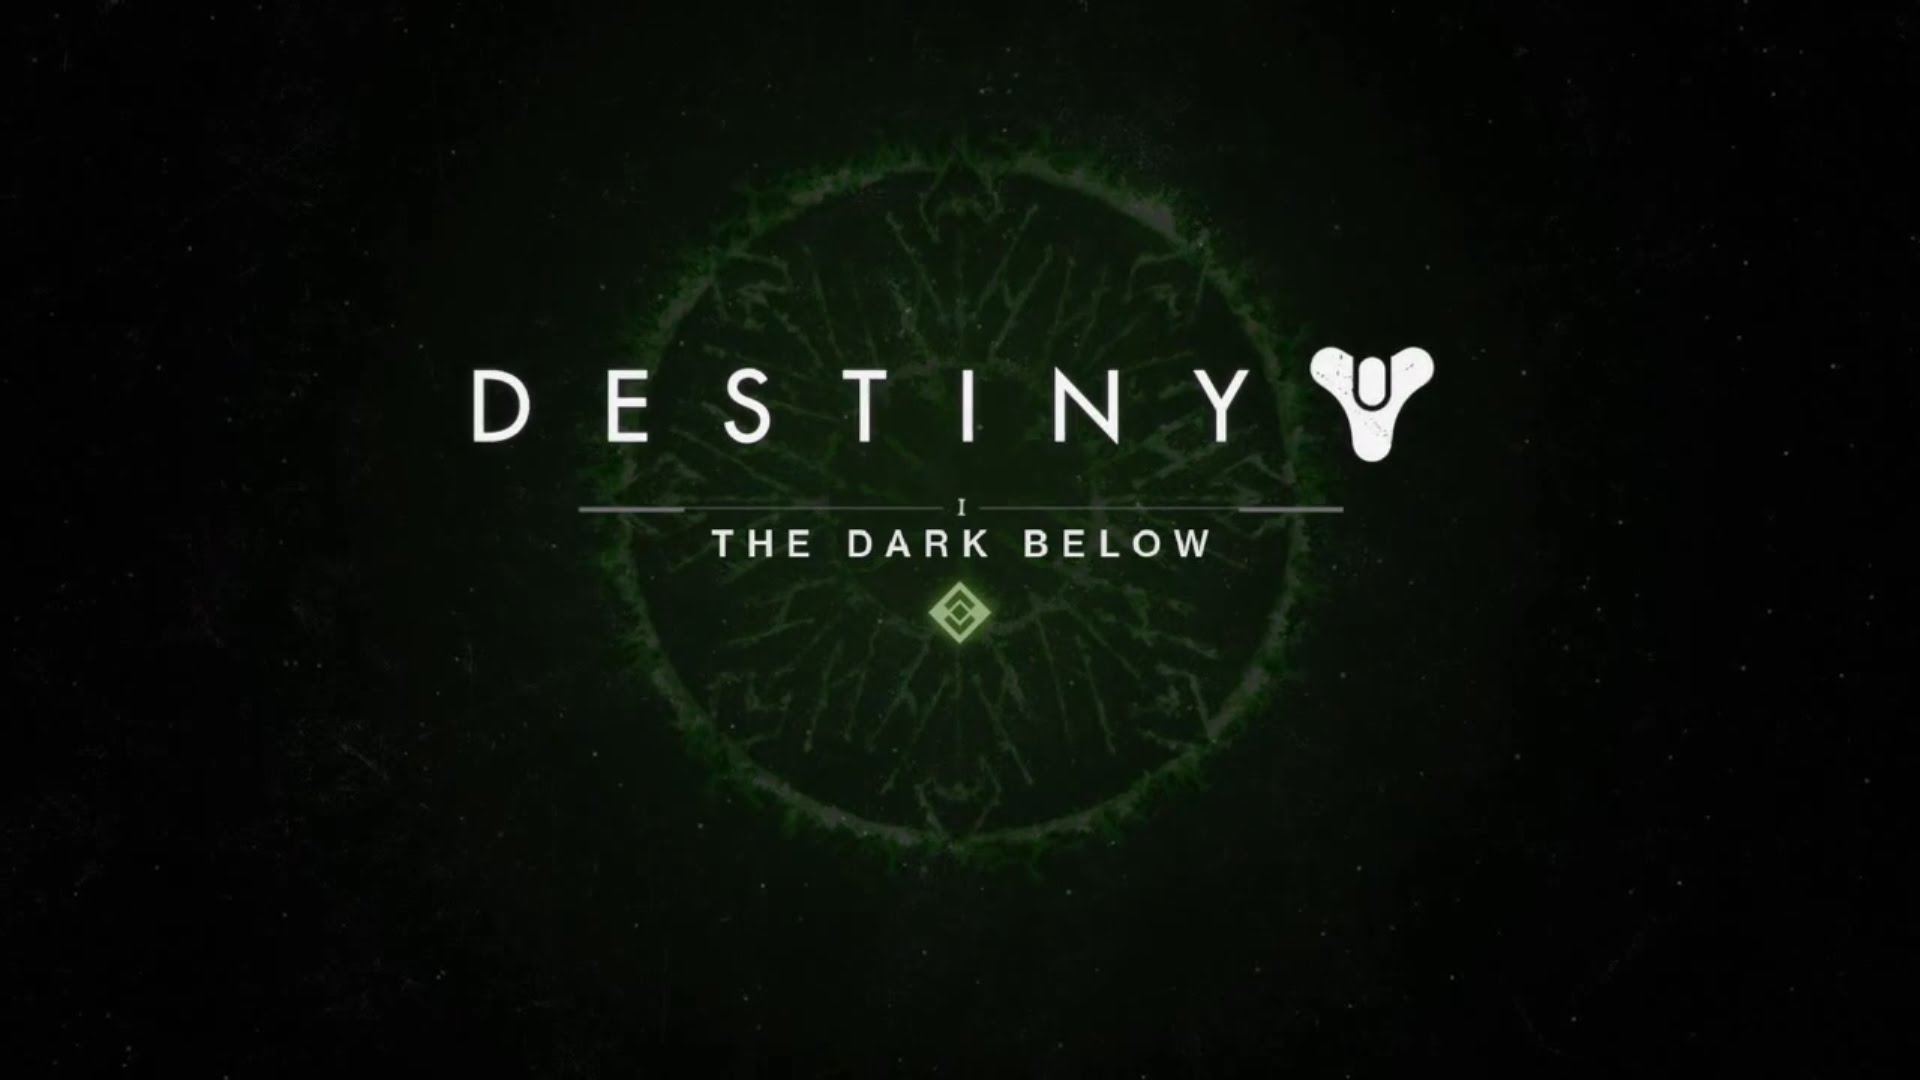 The Dark Below Backgrounds, Compatible - PC, Mobile, Gadgets| 1920x1080 px